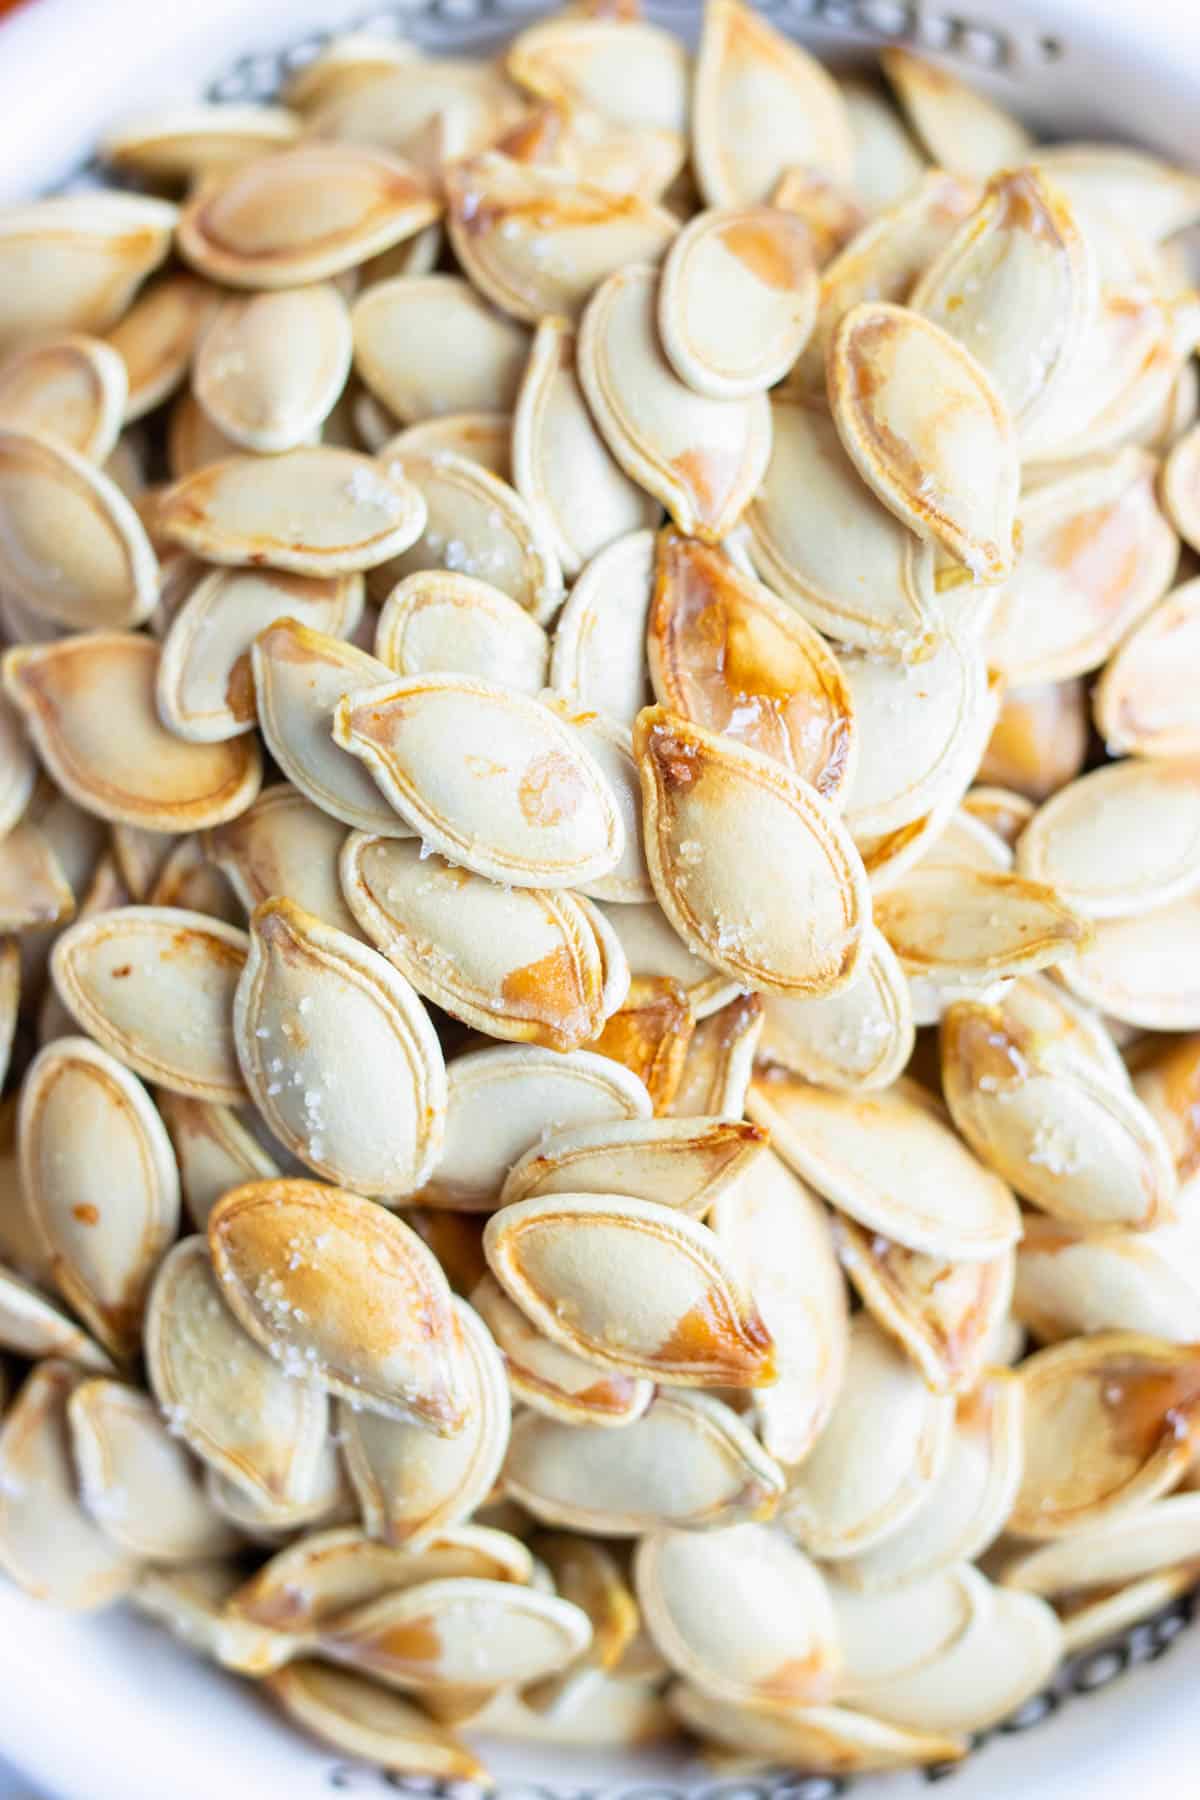 Roasted pumpkin seeds are baked with different seasonings.